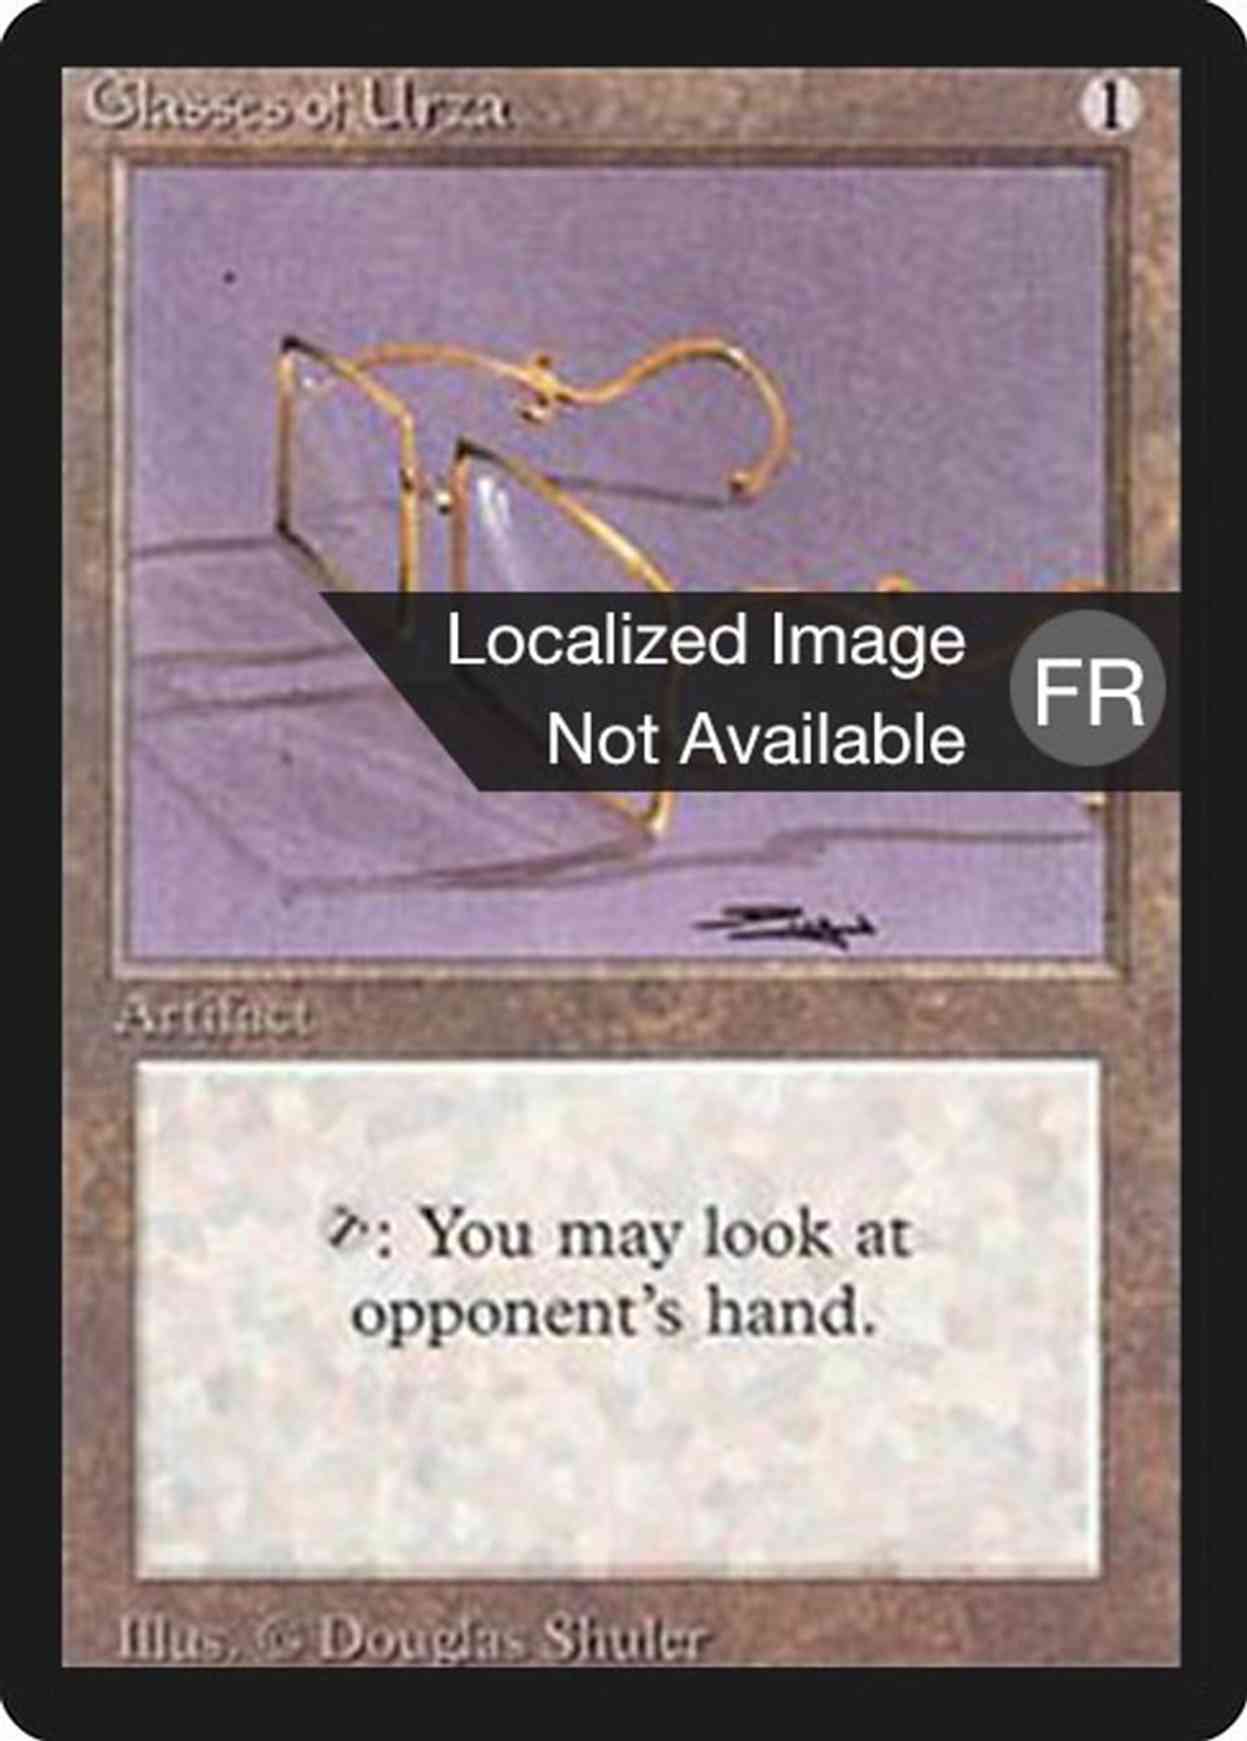 Glasses of Urza magic card front